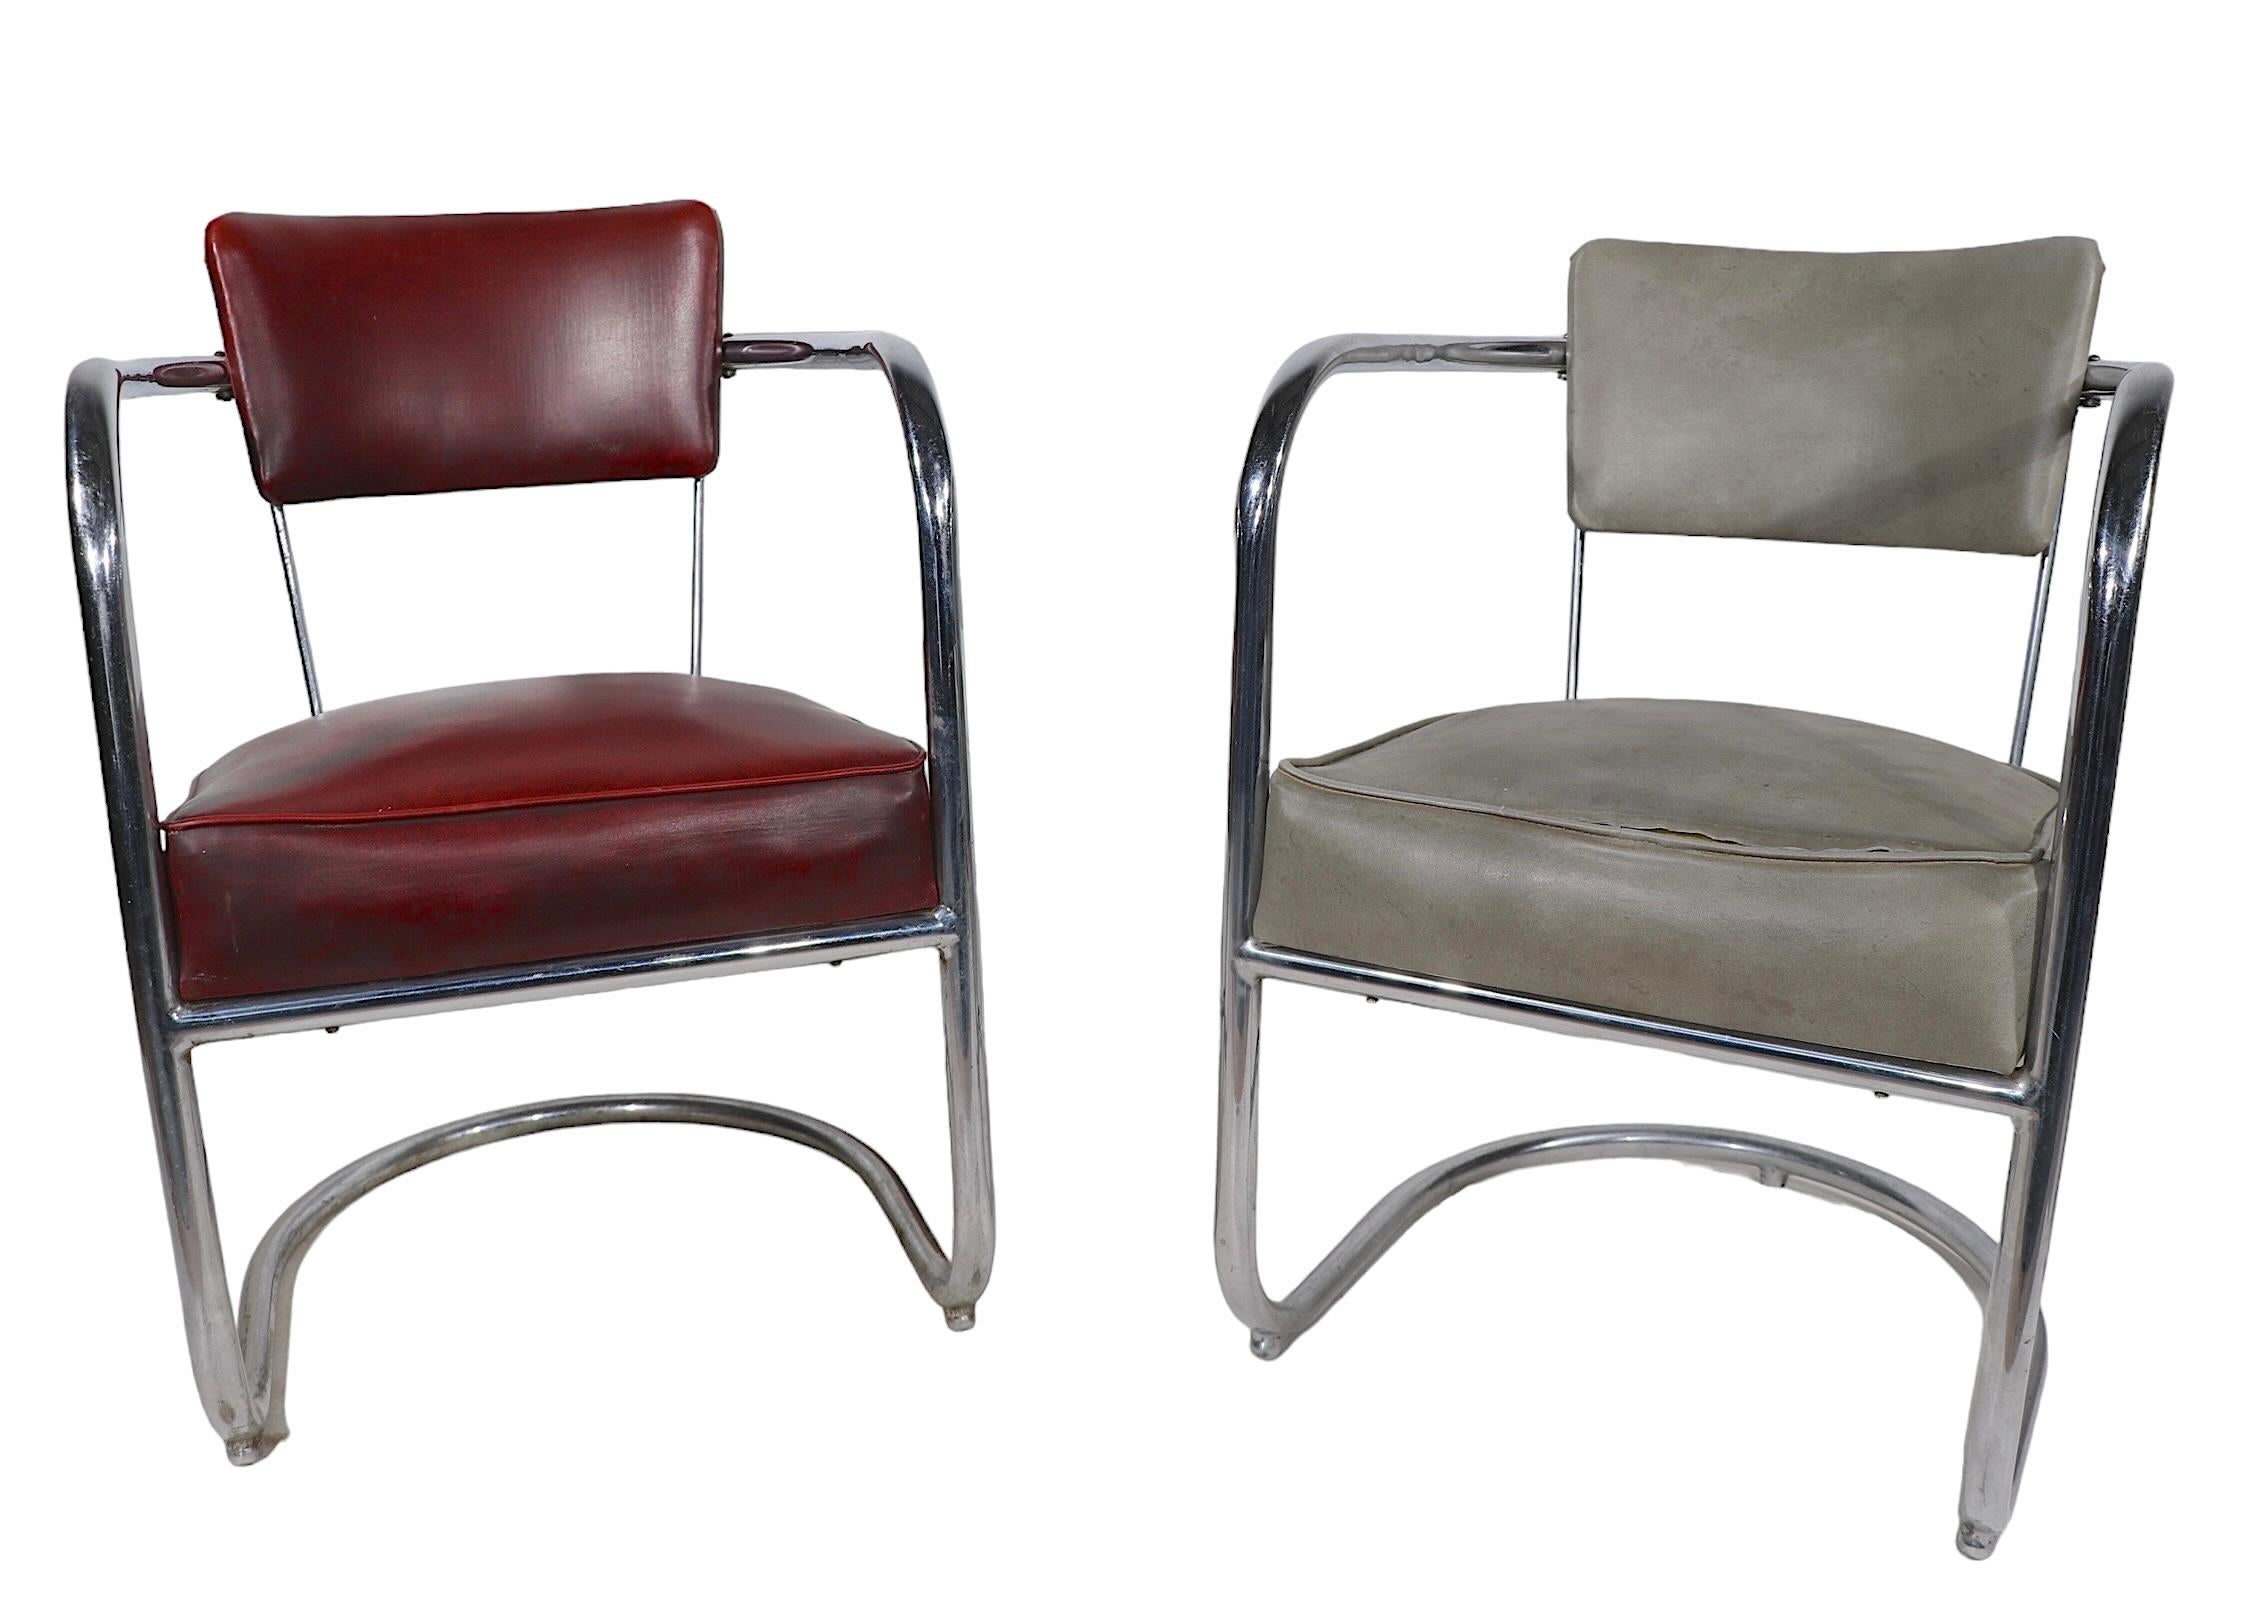 Tubular chrome barrel chairs, made by Lloyd furniture, design attributed to Kim Weber, circa 1930's. The chairs exhibit classic early Industrial, Machine Age, Art Deco style, having a continuous cantilevered  tubular frame,  with vinyl seats and